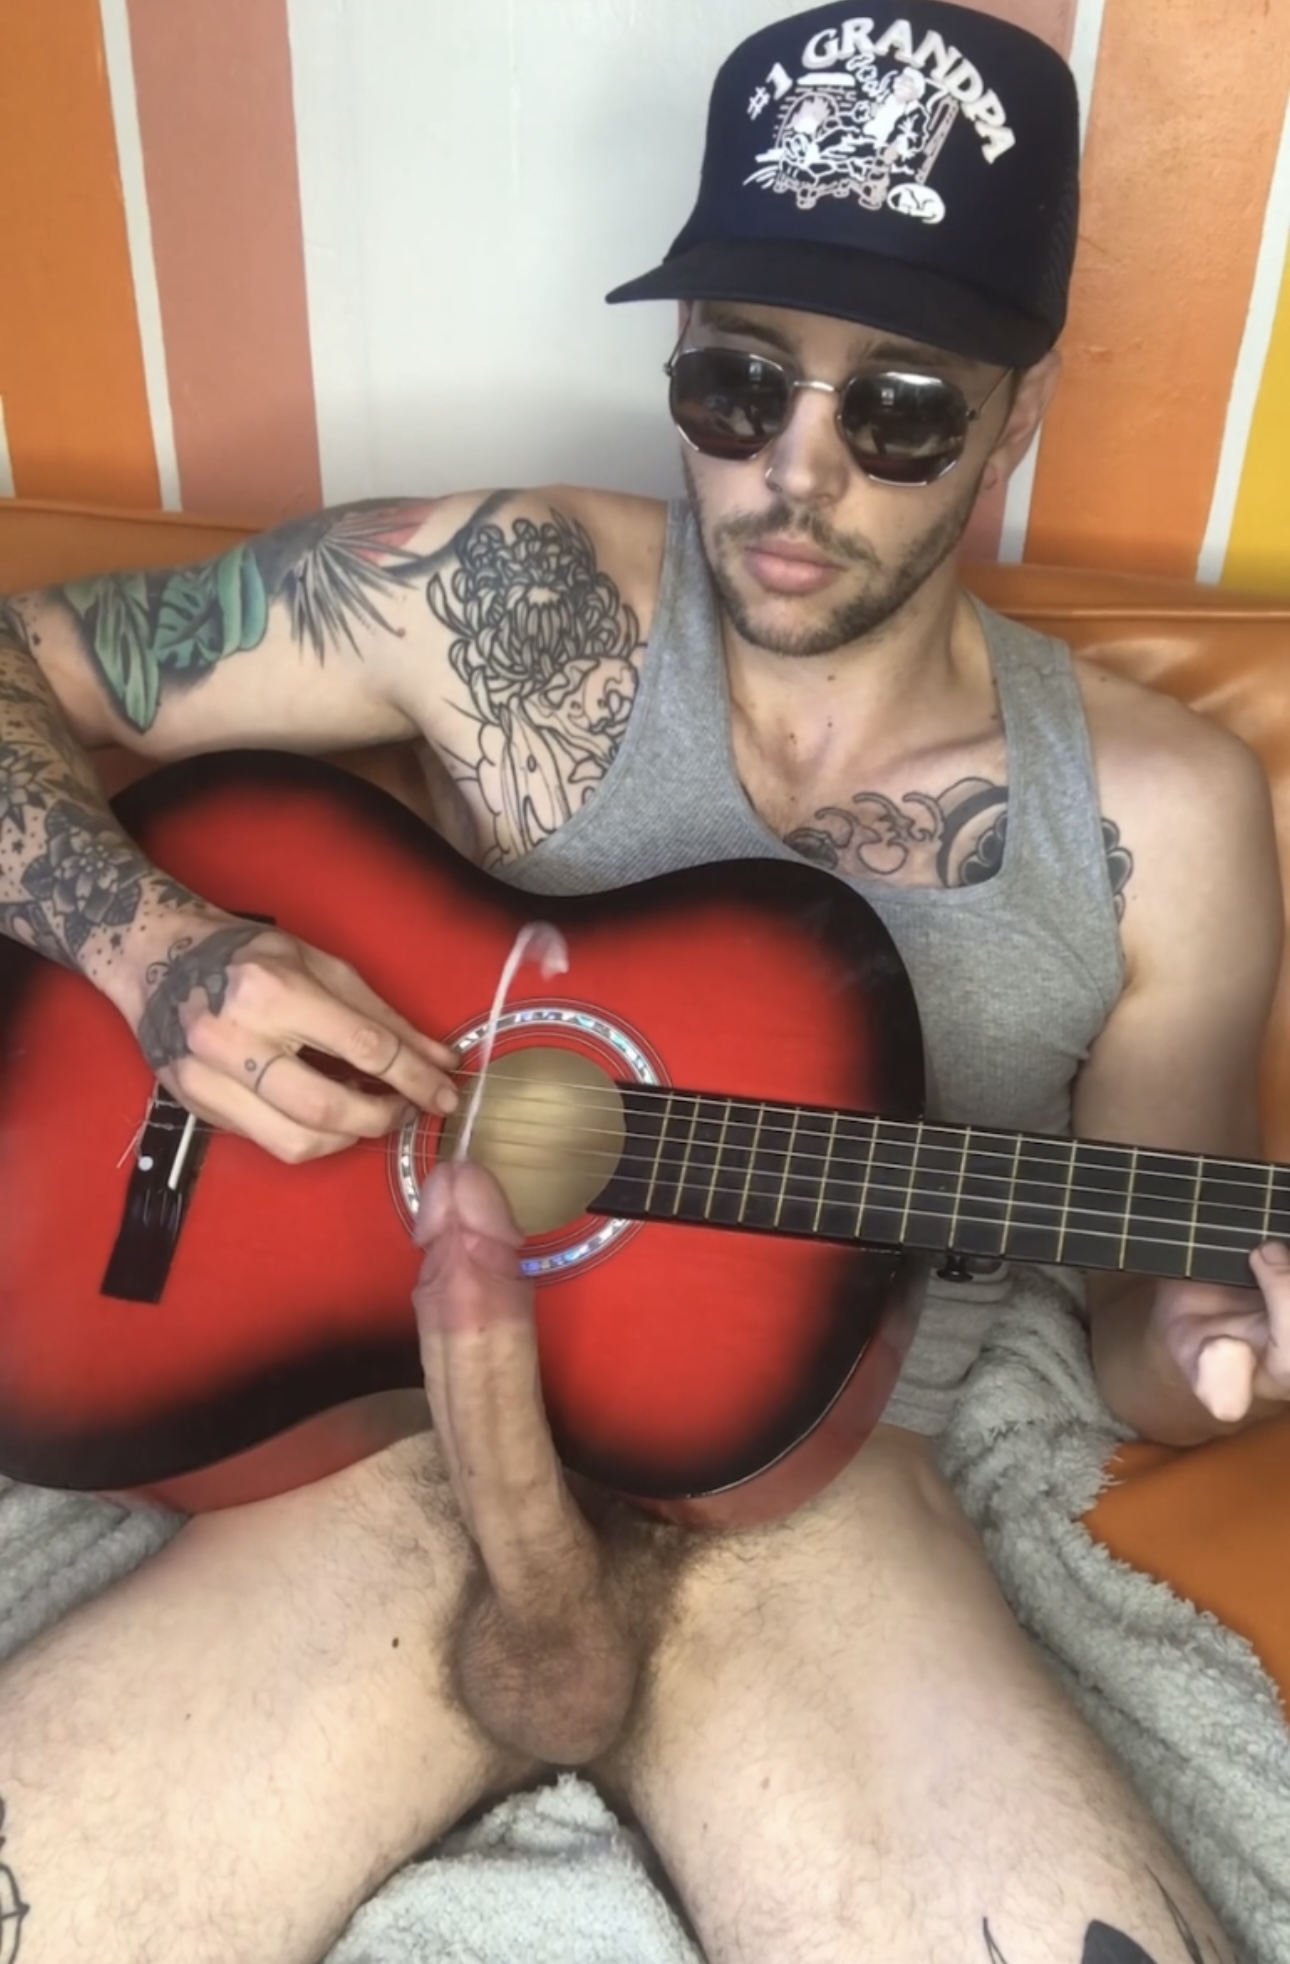 *BWC* cums hands-free playing guitar